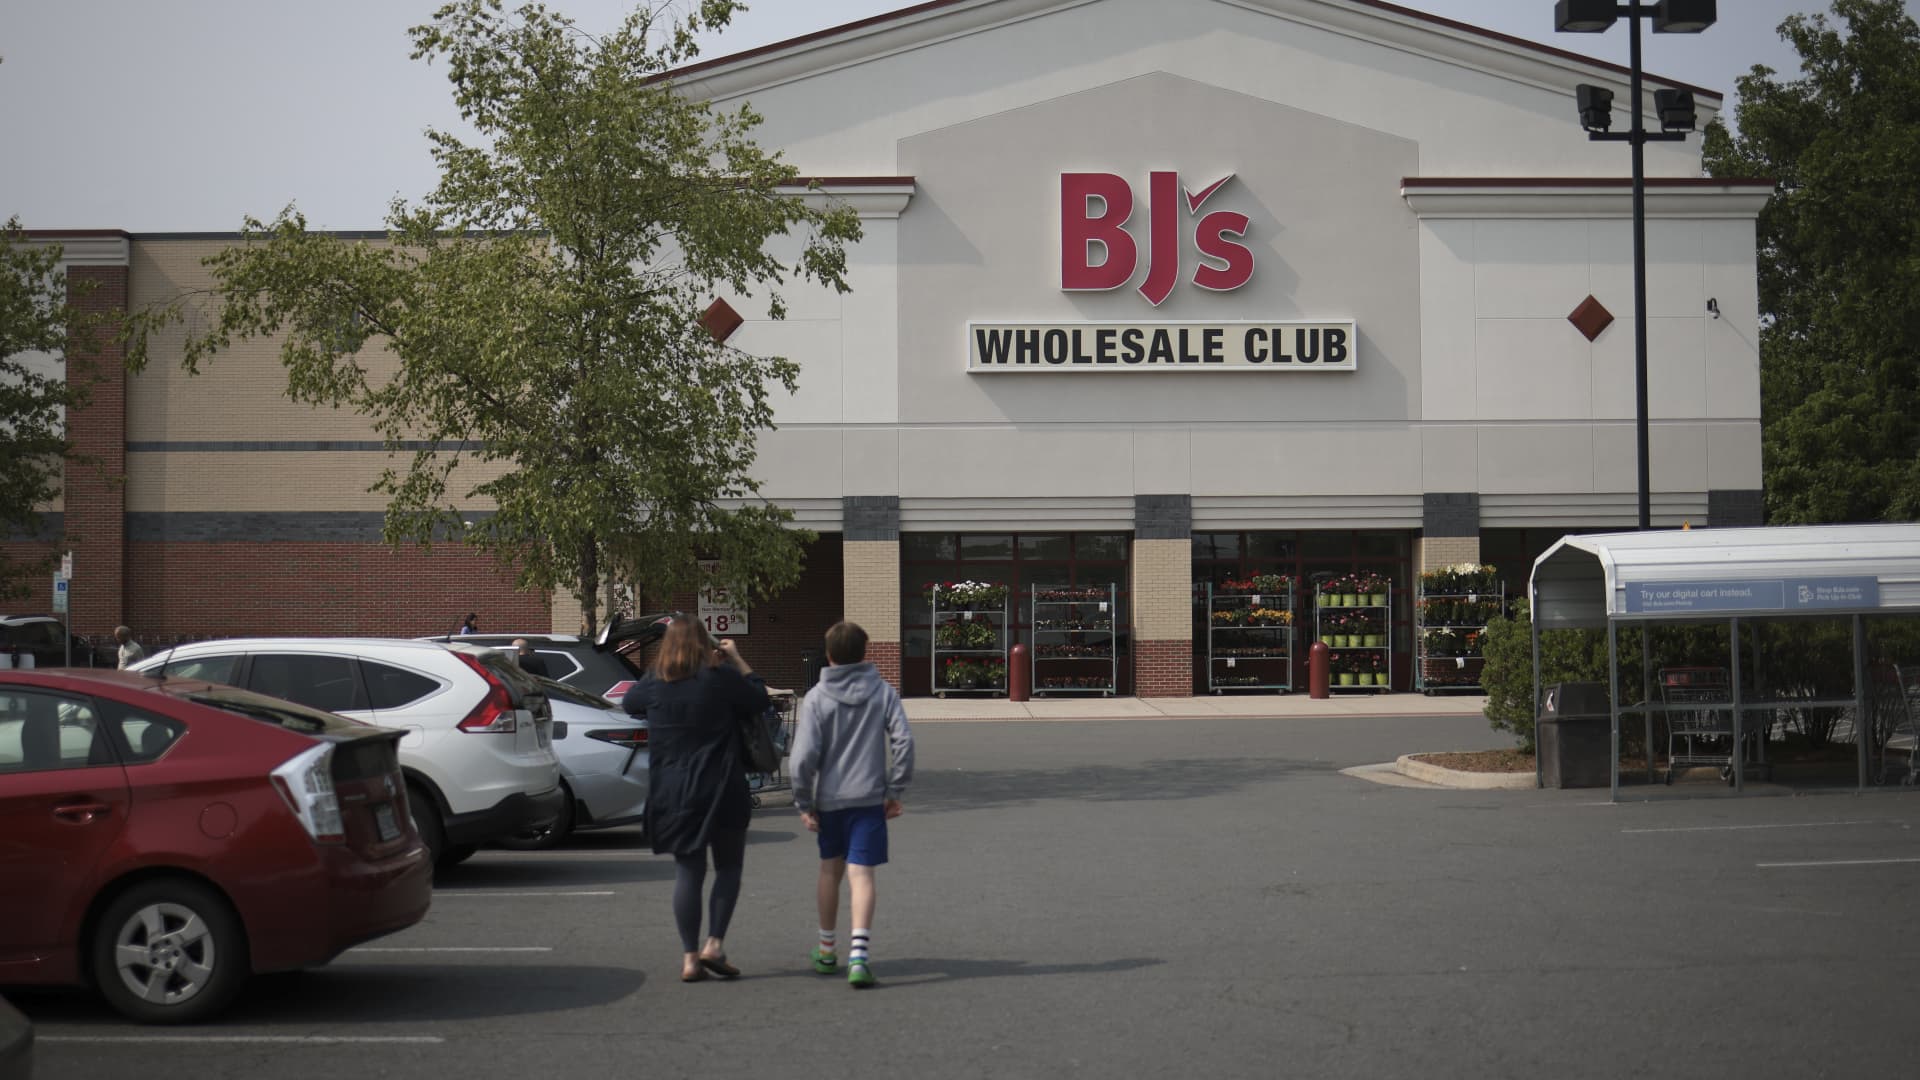 Costco and Sam's Club's smaller rival BJ's Wholesale will open more clubs in Southeast